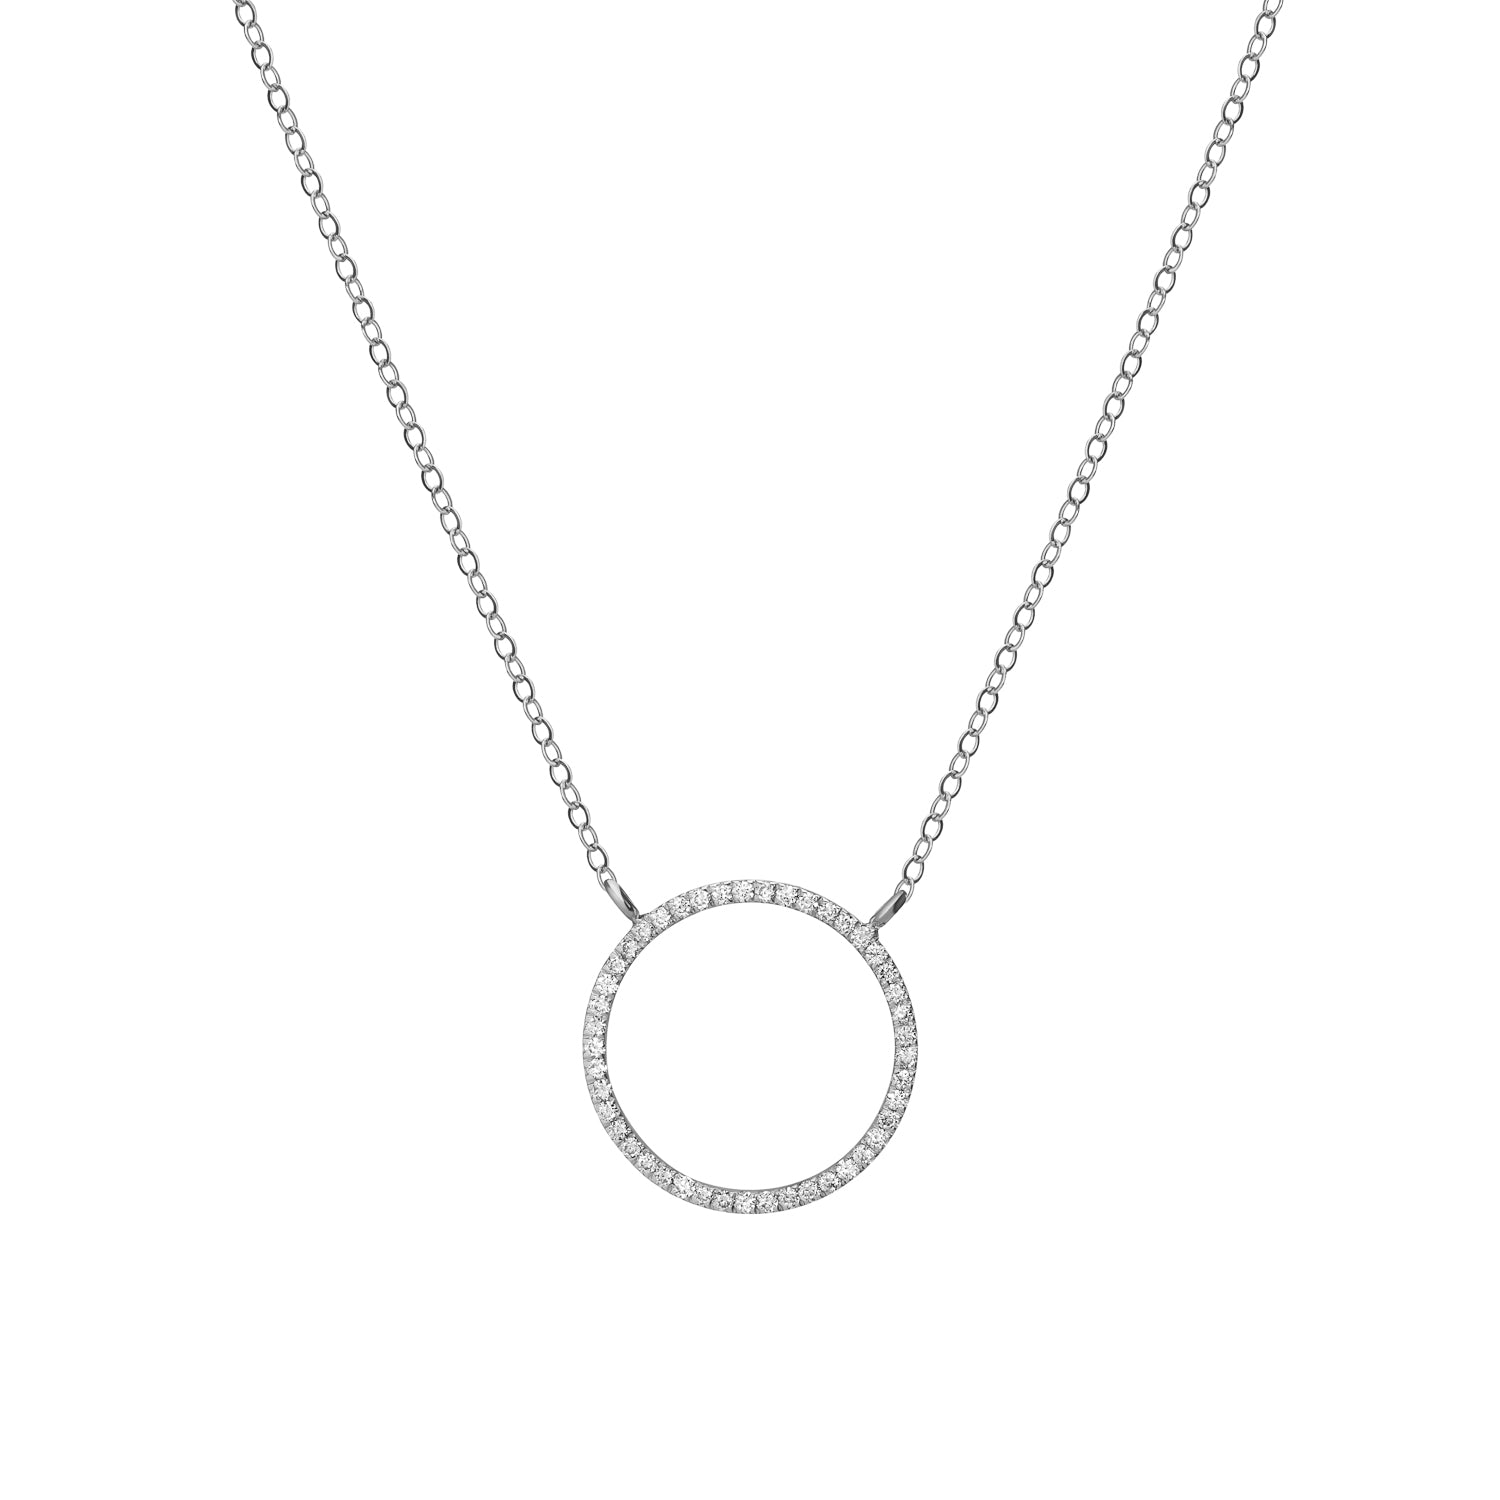 Shahla Karimi Jewelry Landmark Collection Central Park Hoop Necklace 14K White Gold